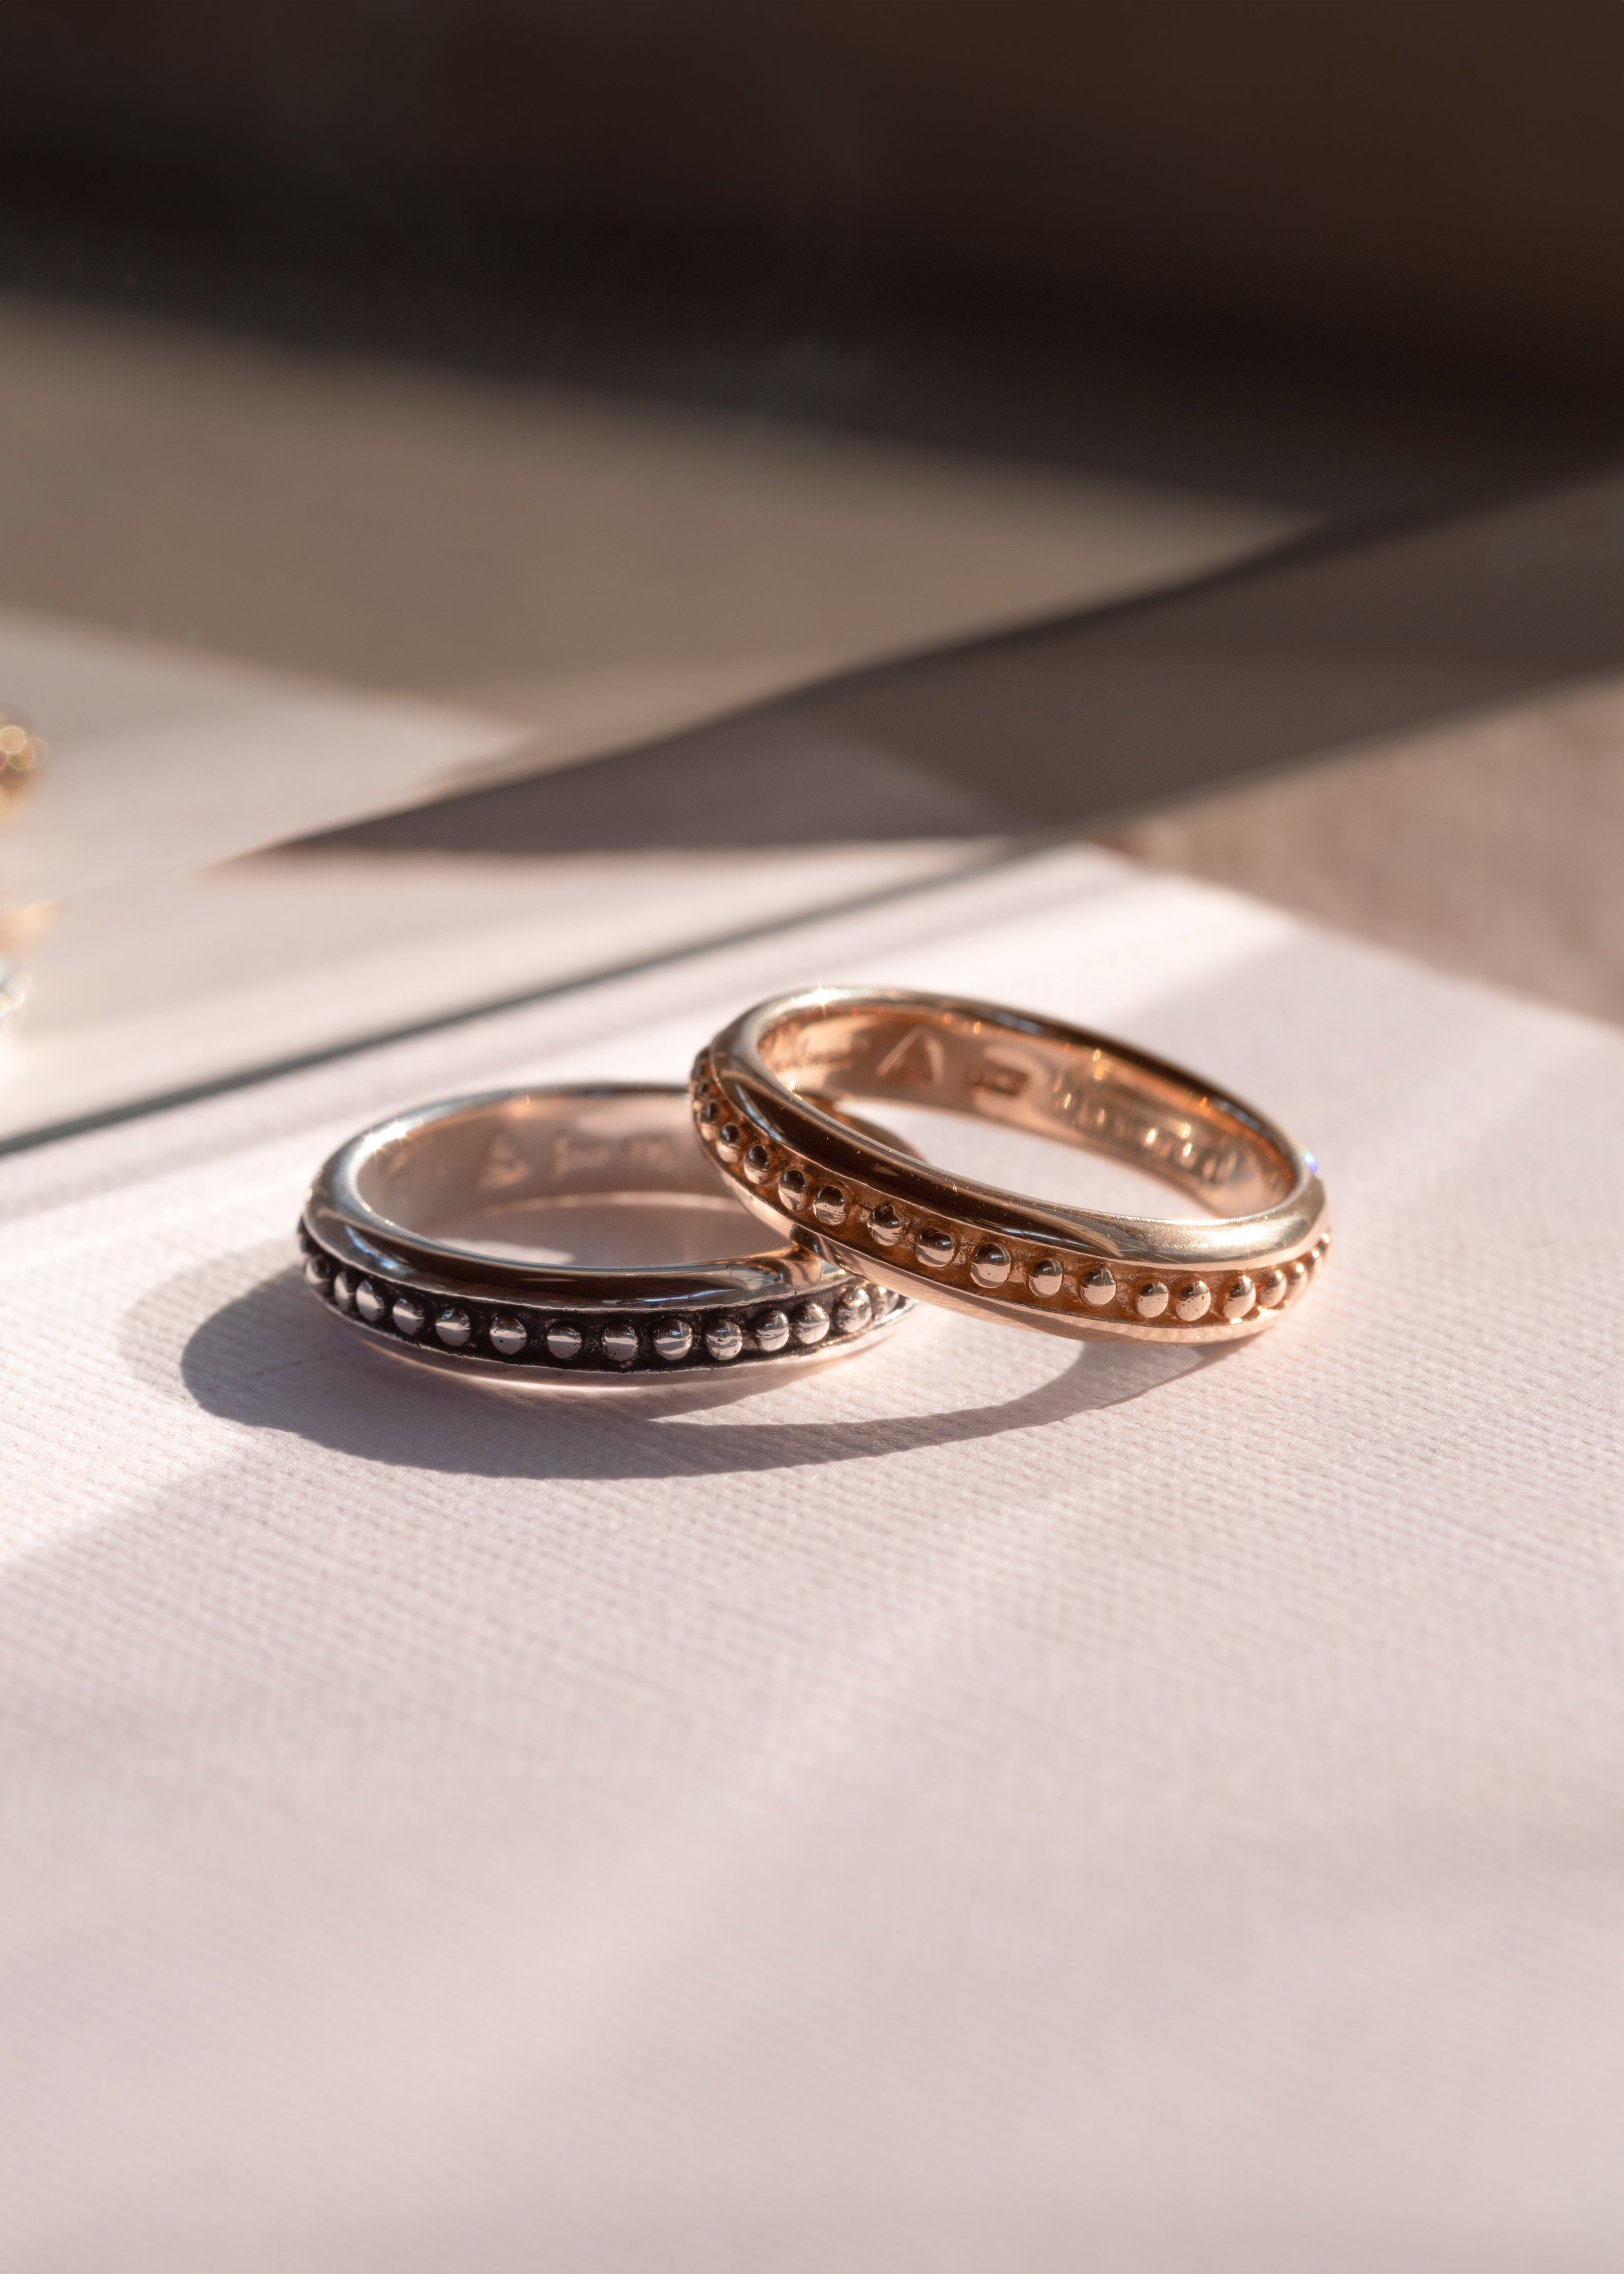 How To Choose Your Wedding Ring (and get it right!)